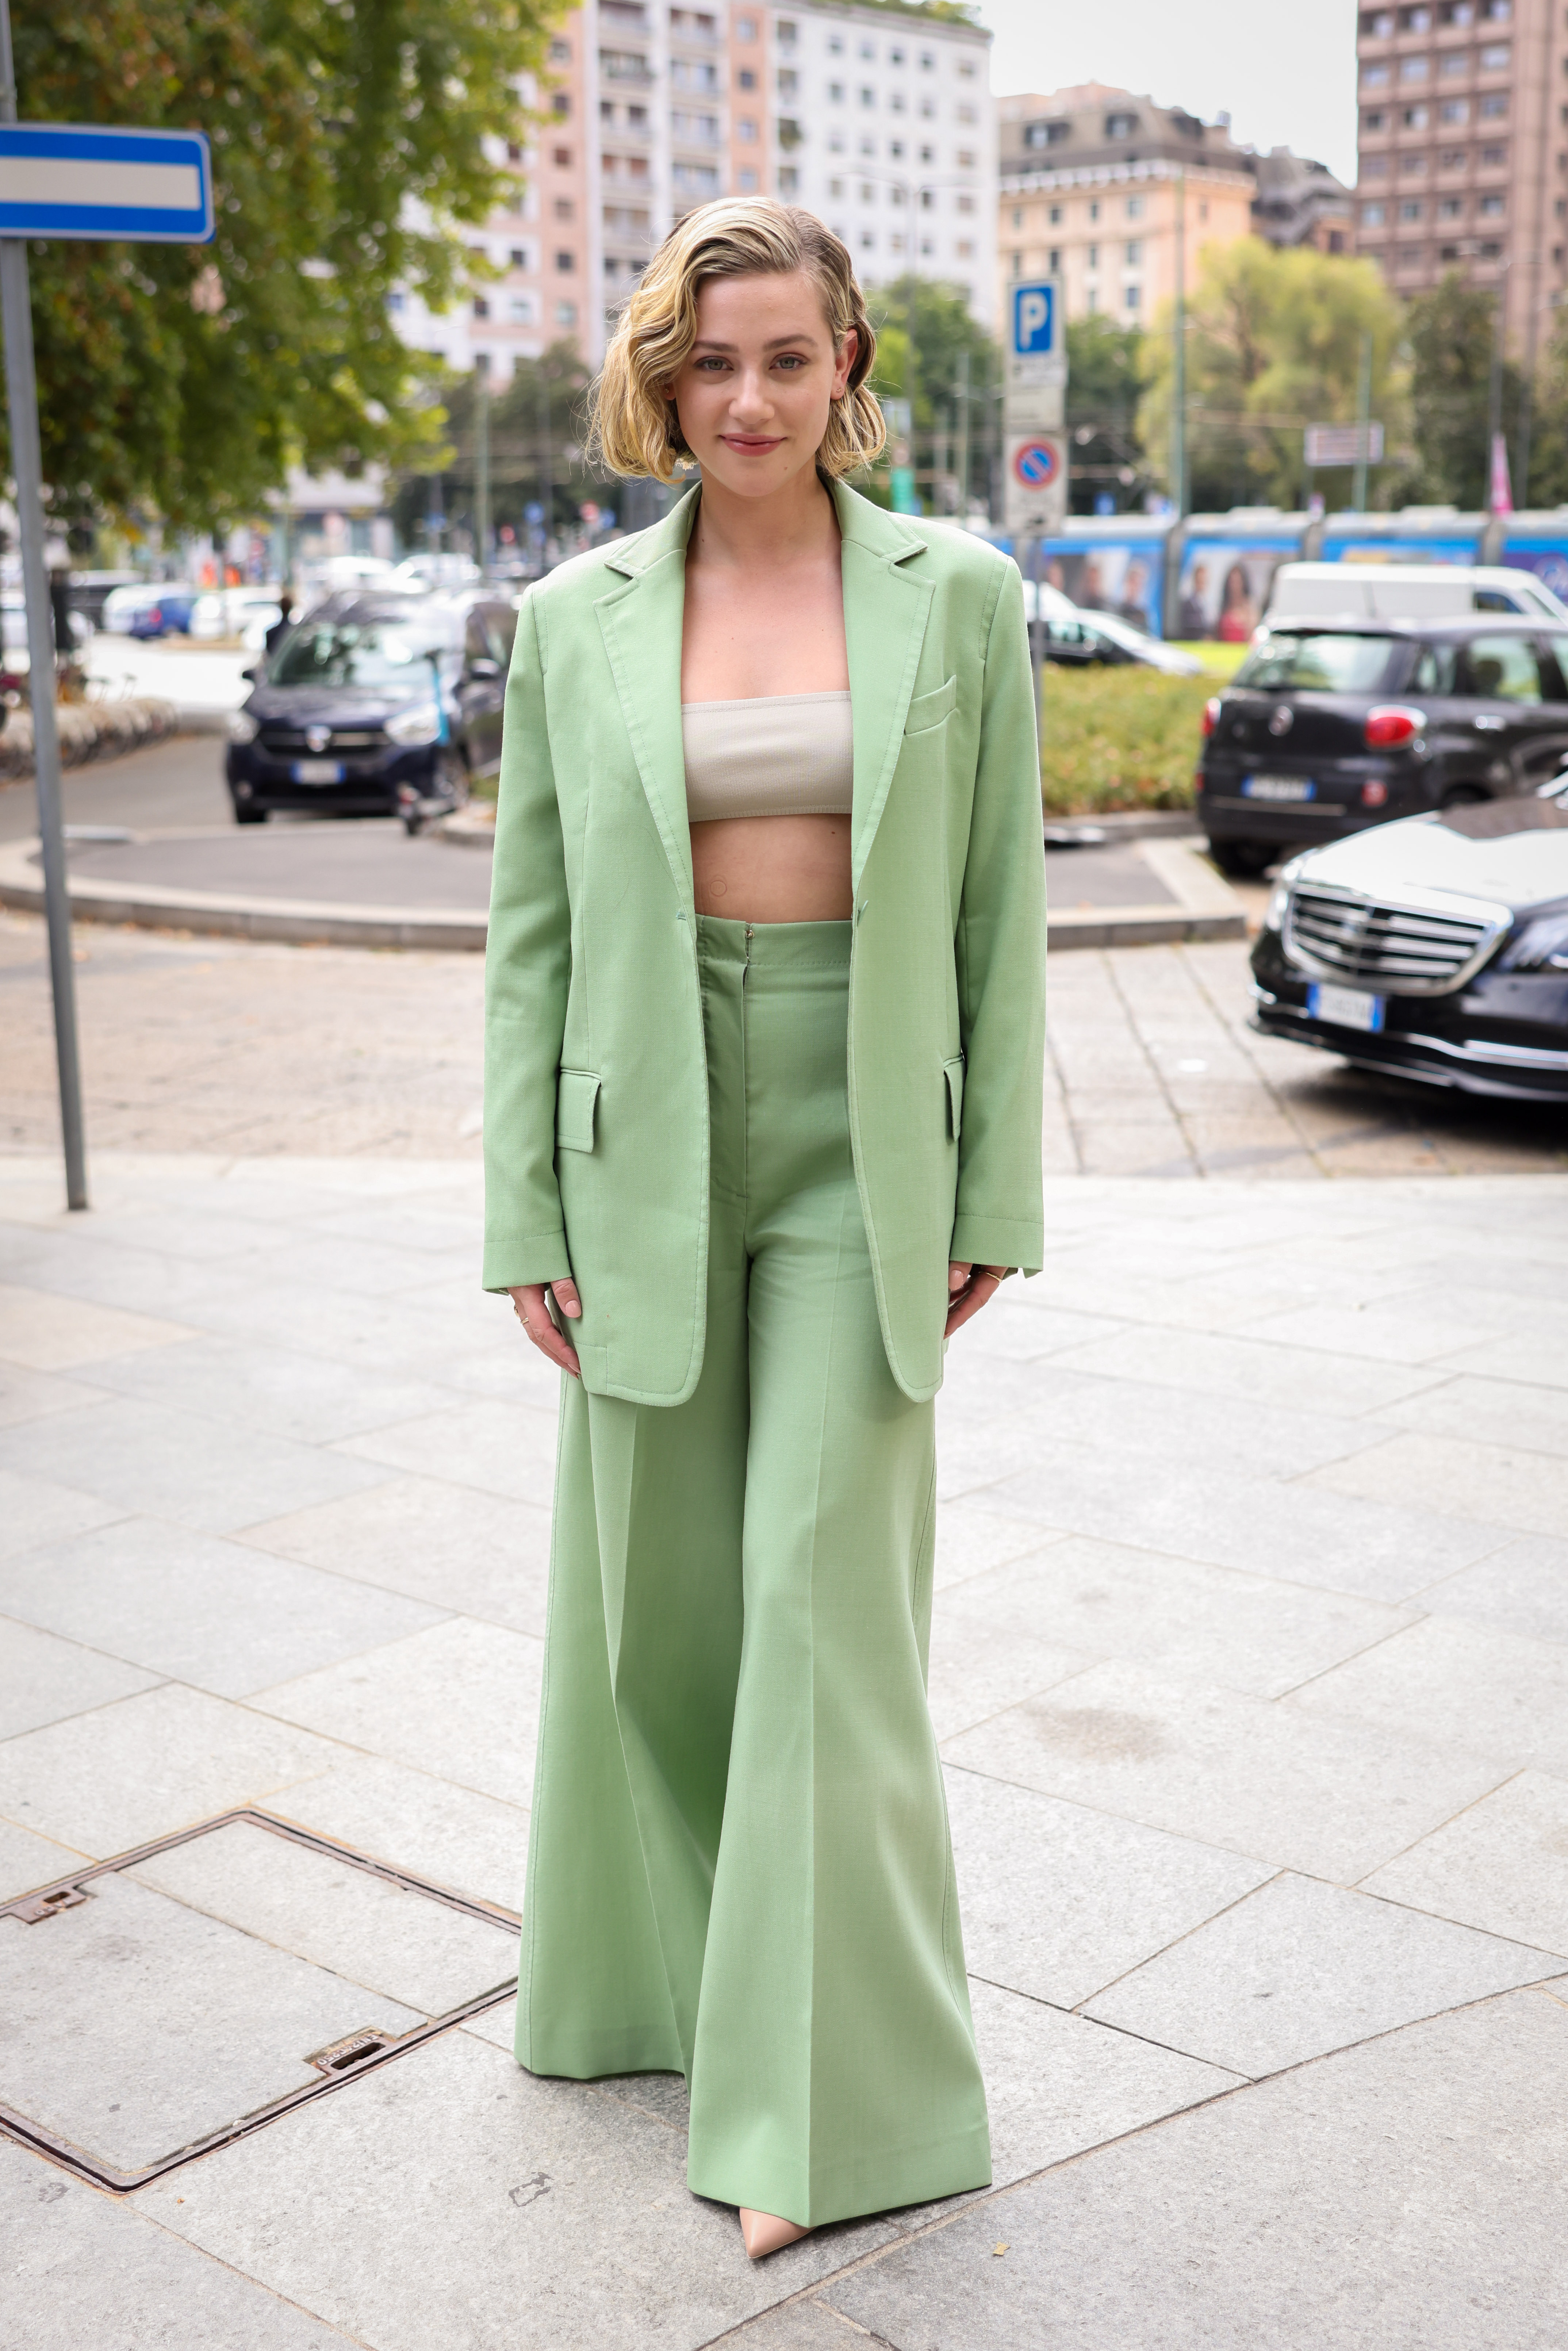 Lili Reinhart heading to Max Mara's spring-summer 2023 show at Milan Fashion Week wearing pistachio green tailored outfit and sash top